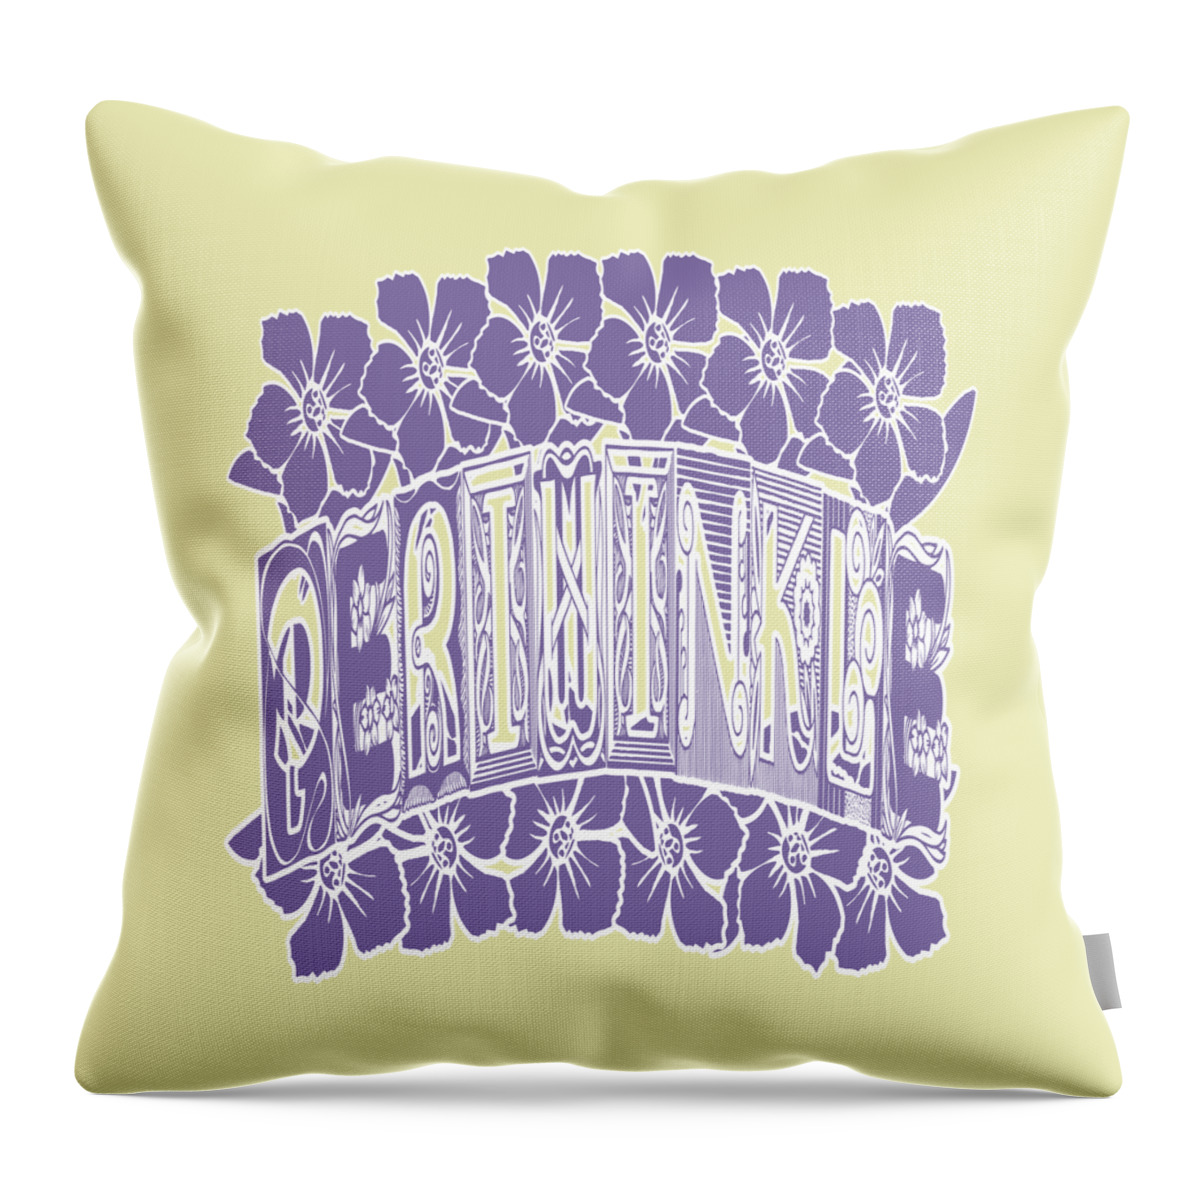 Periwinkle Throw Pillow featuring the digital art Periwinkle Blue Floral Trend by Delynn Addams